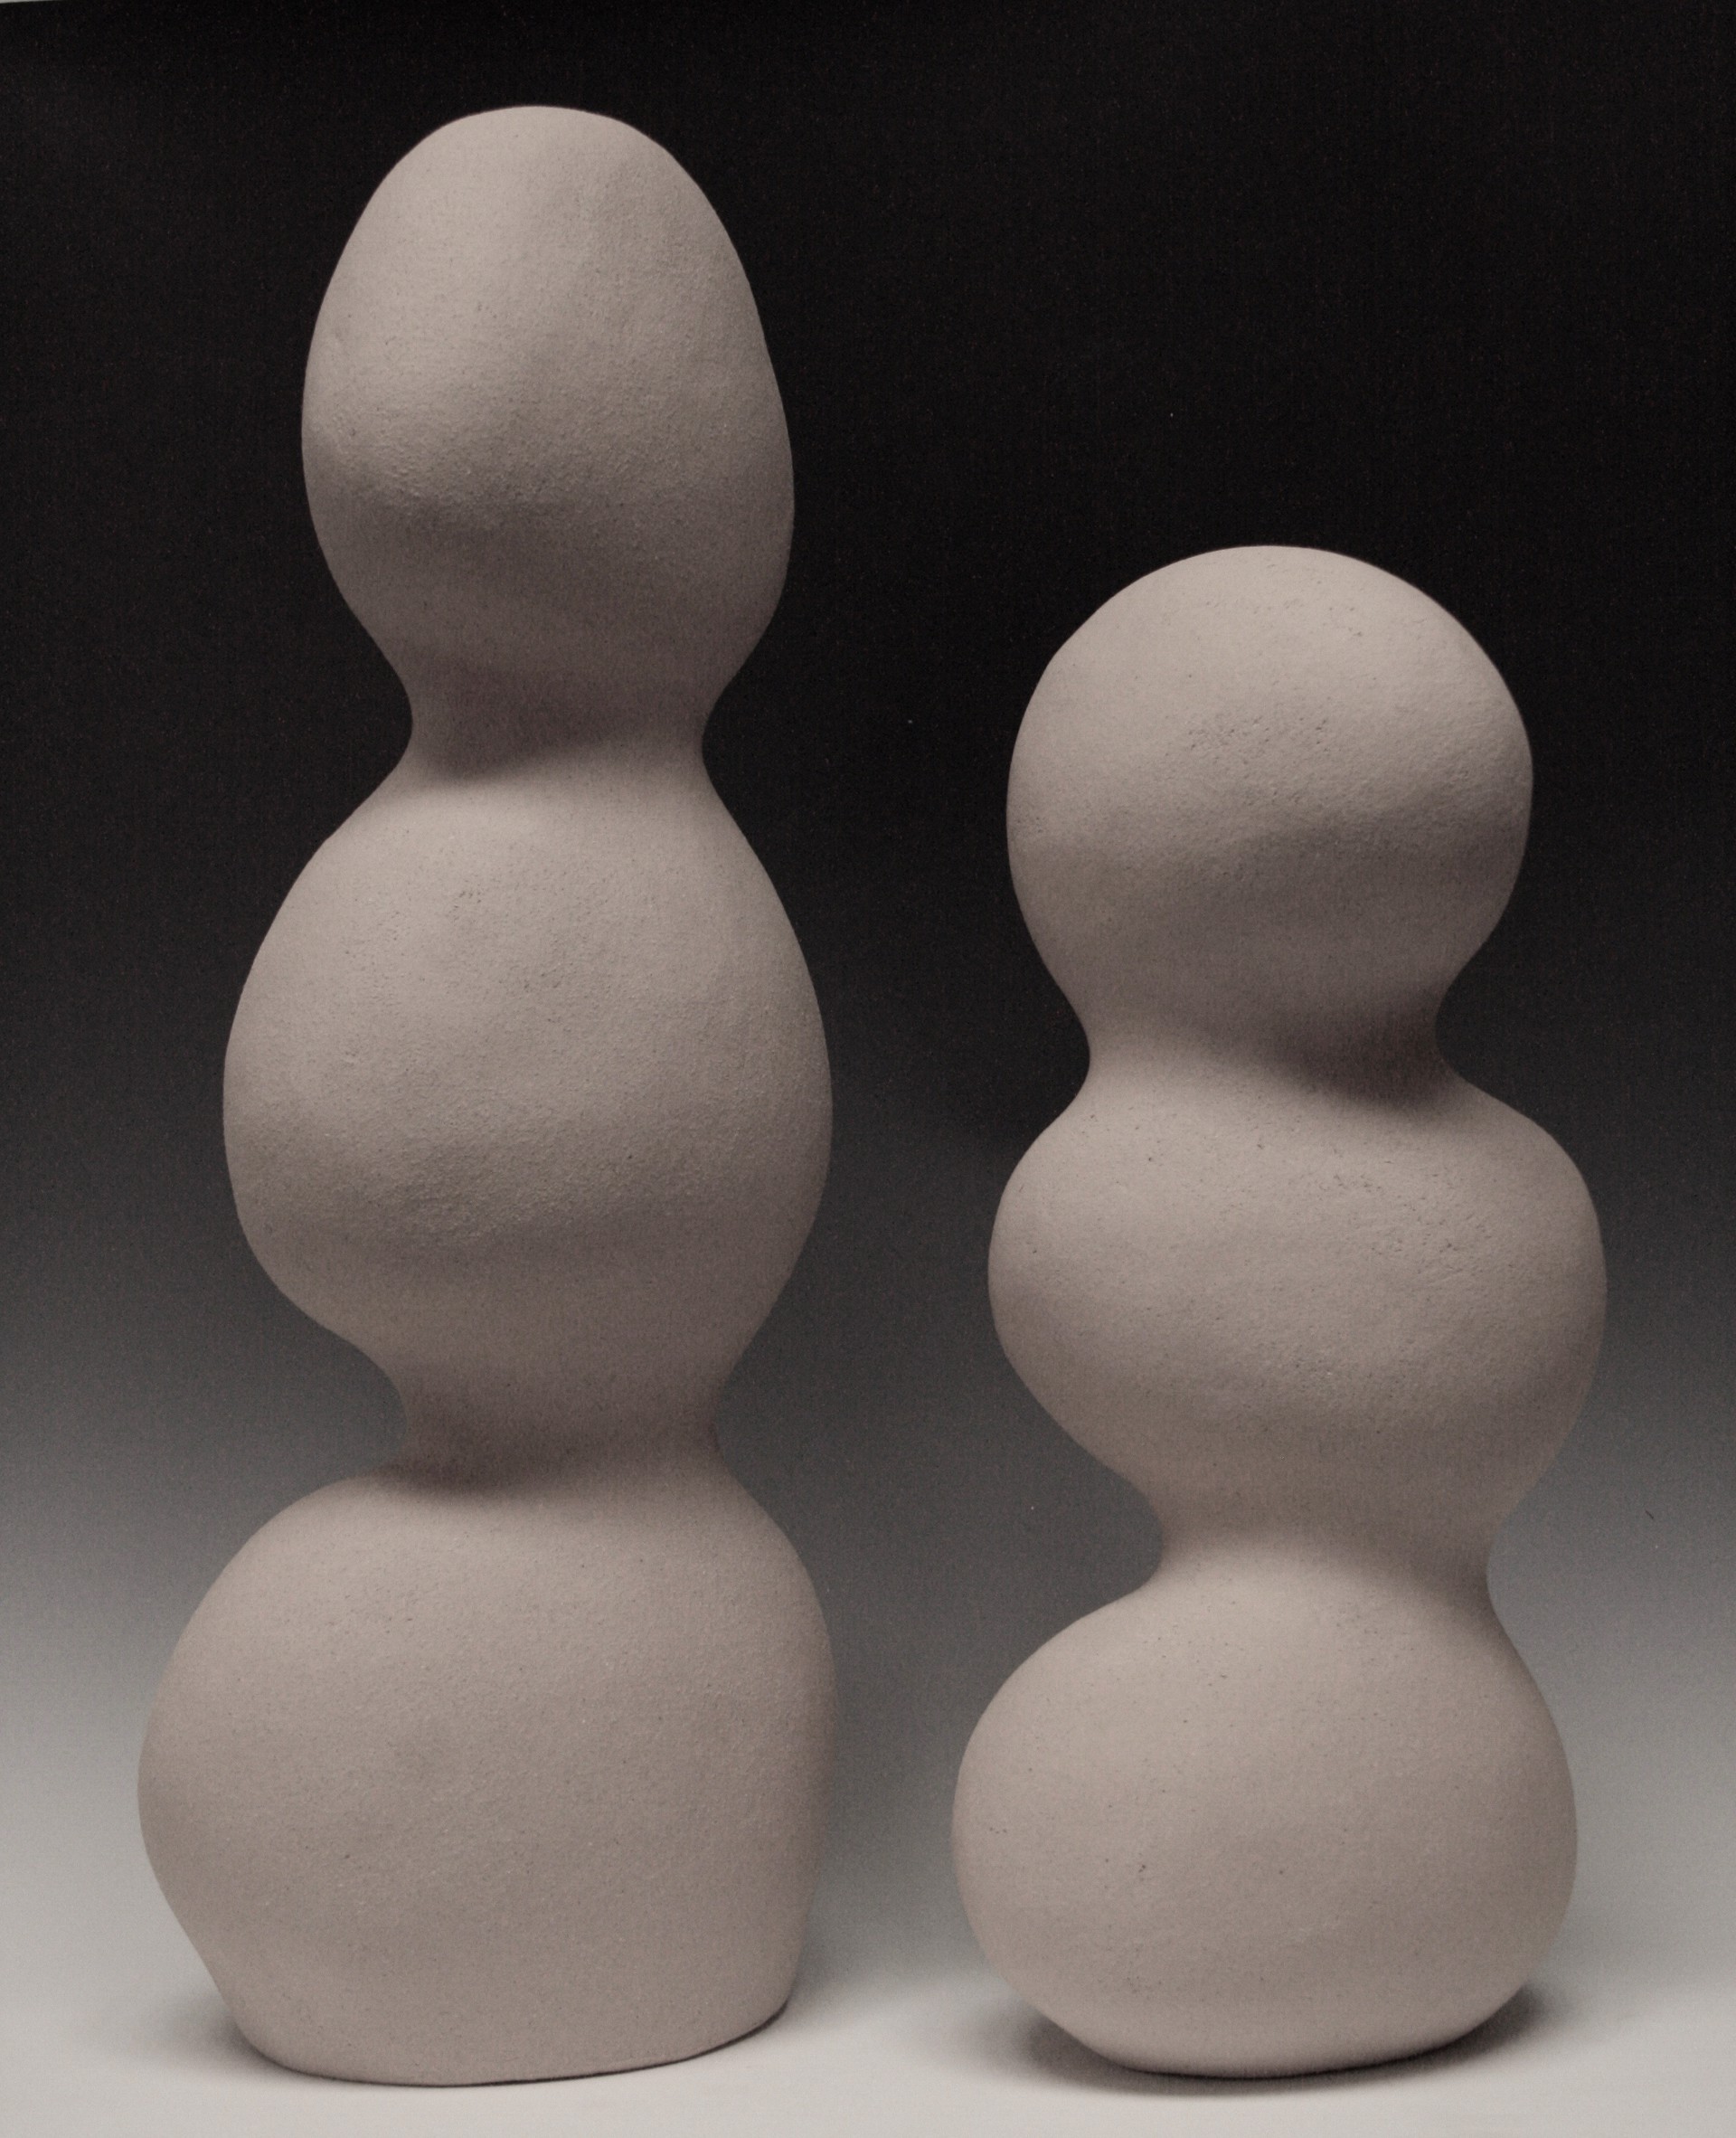 Pair of Segmented Totems by Peter St. Lawrence